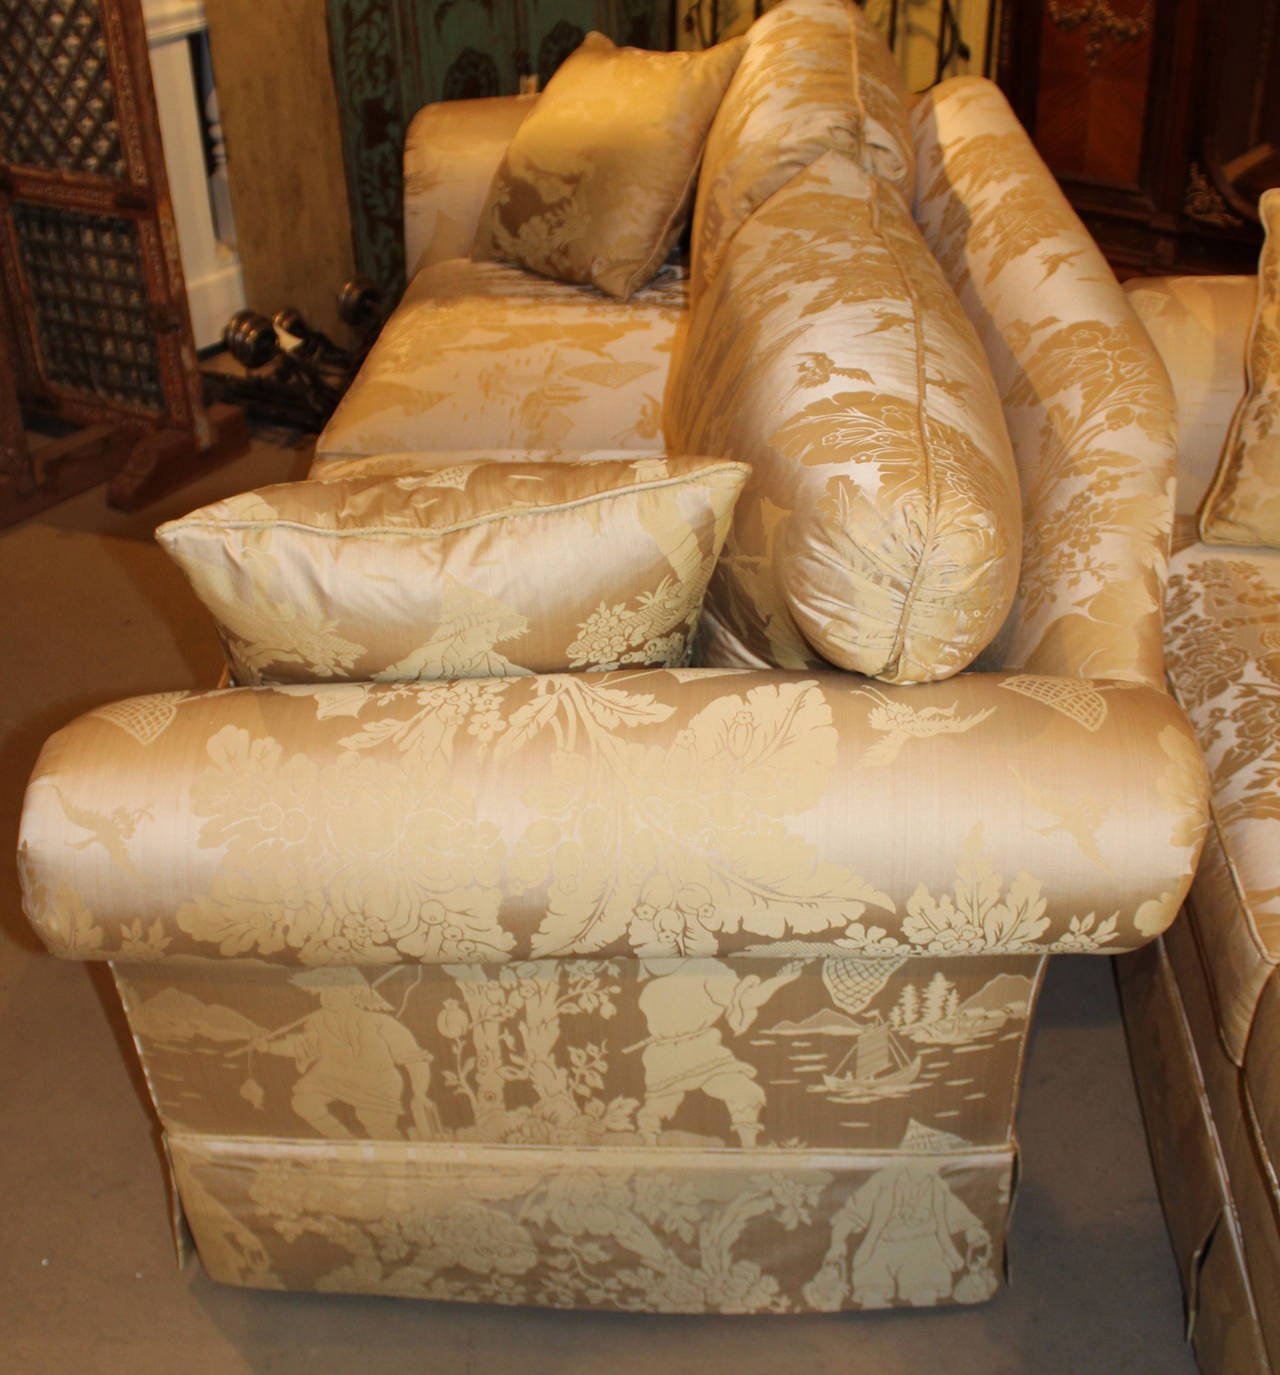 A pair of beautiful Chinoiserie silk upholstered sofas with matching pillows, made by Kindel Furniture Company, Grand Rapids, Michigan. The back pillows are partially made with waterfowl feathers and grey duck down, with the throw pillows made with